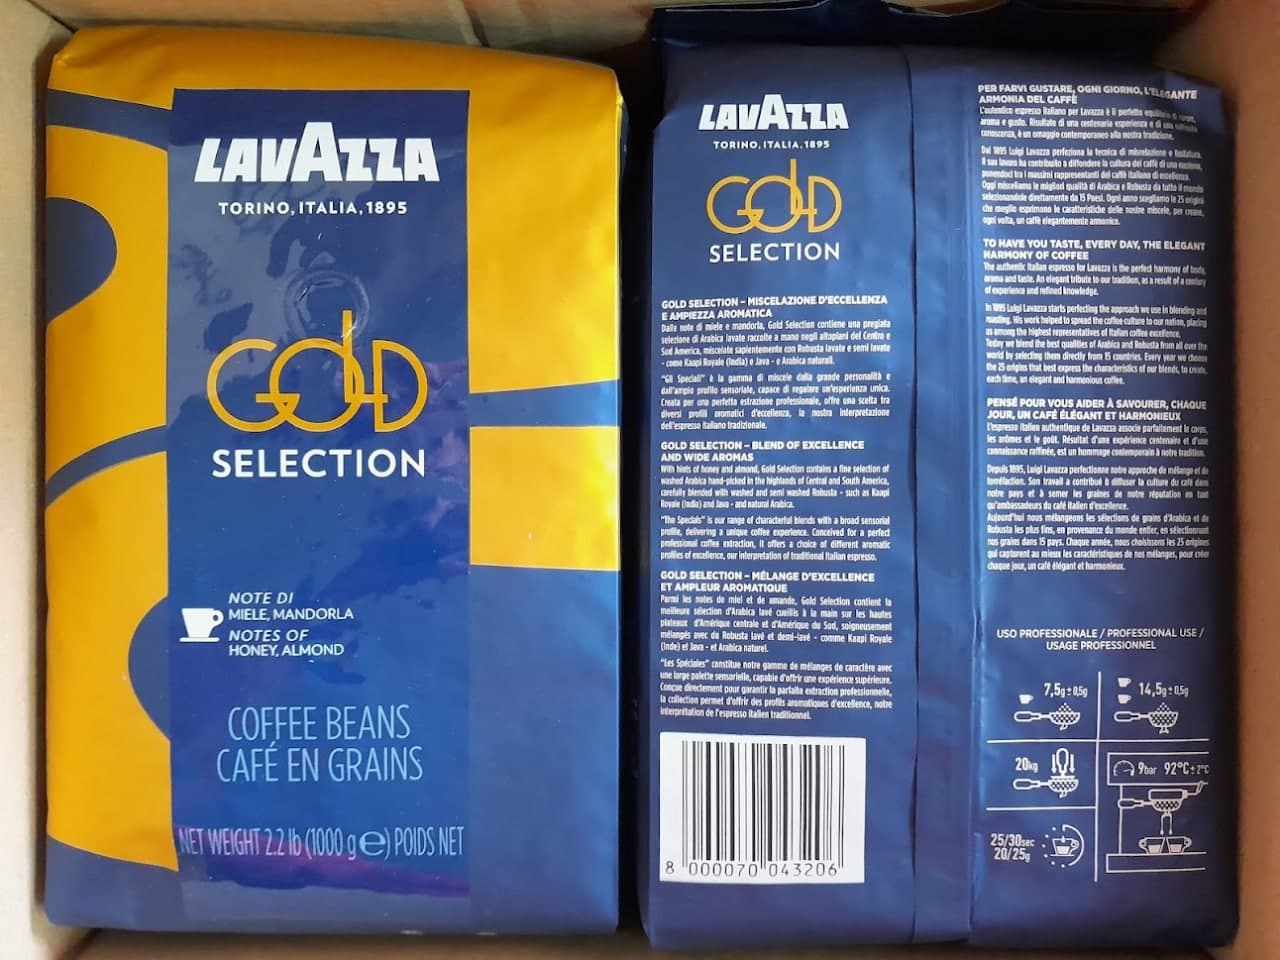 Kohvioad "LAVAZZA" Specials Collection Gold Selection